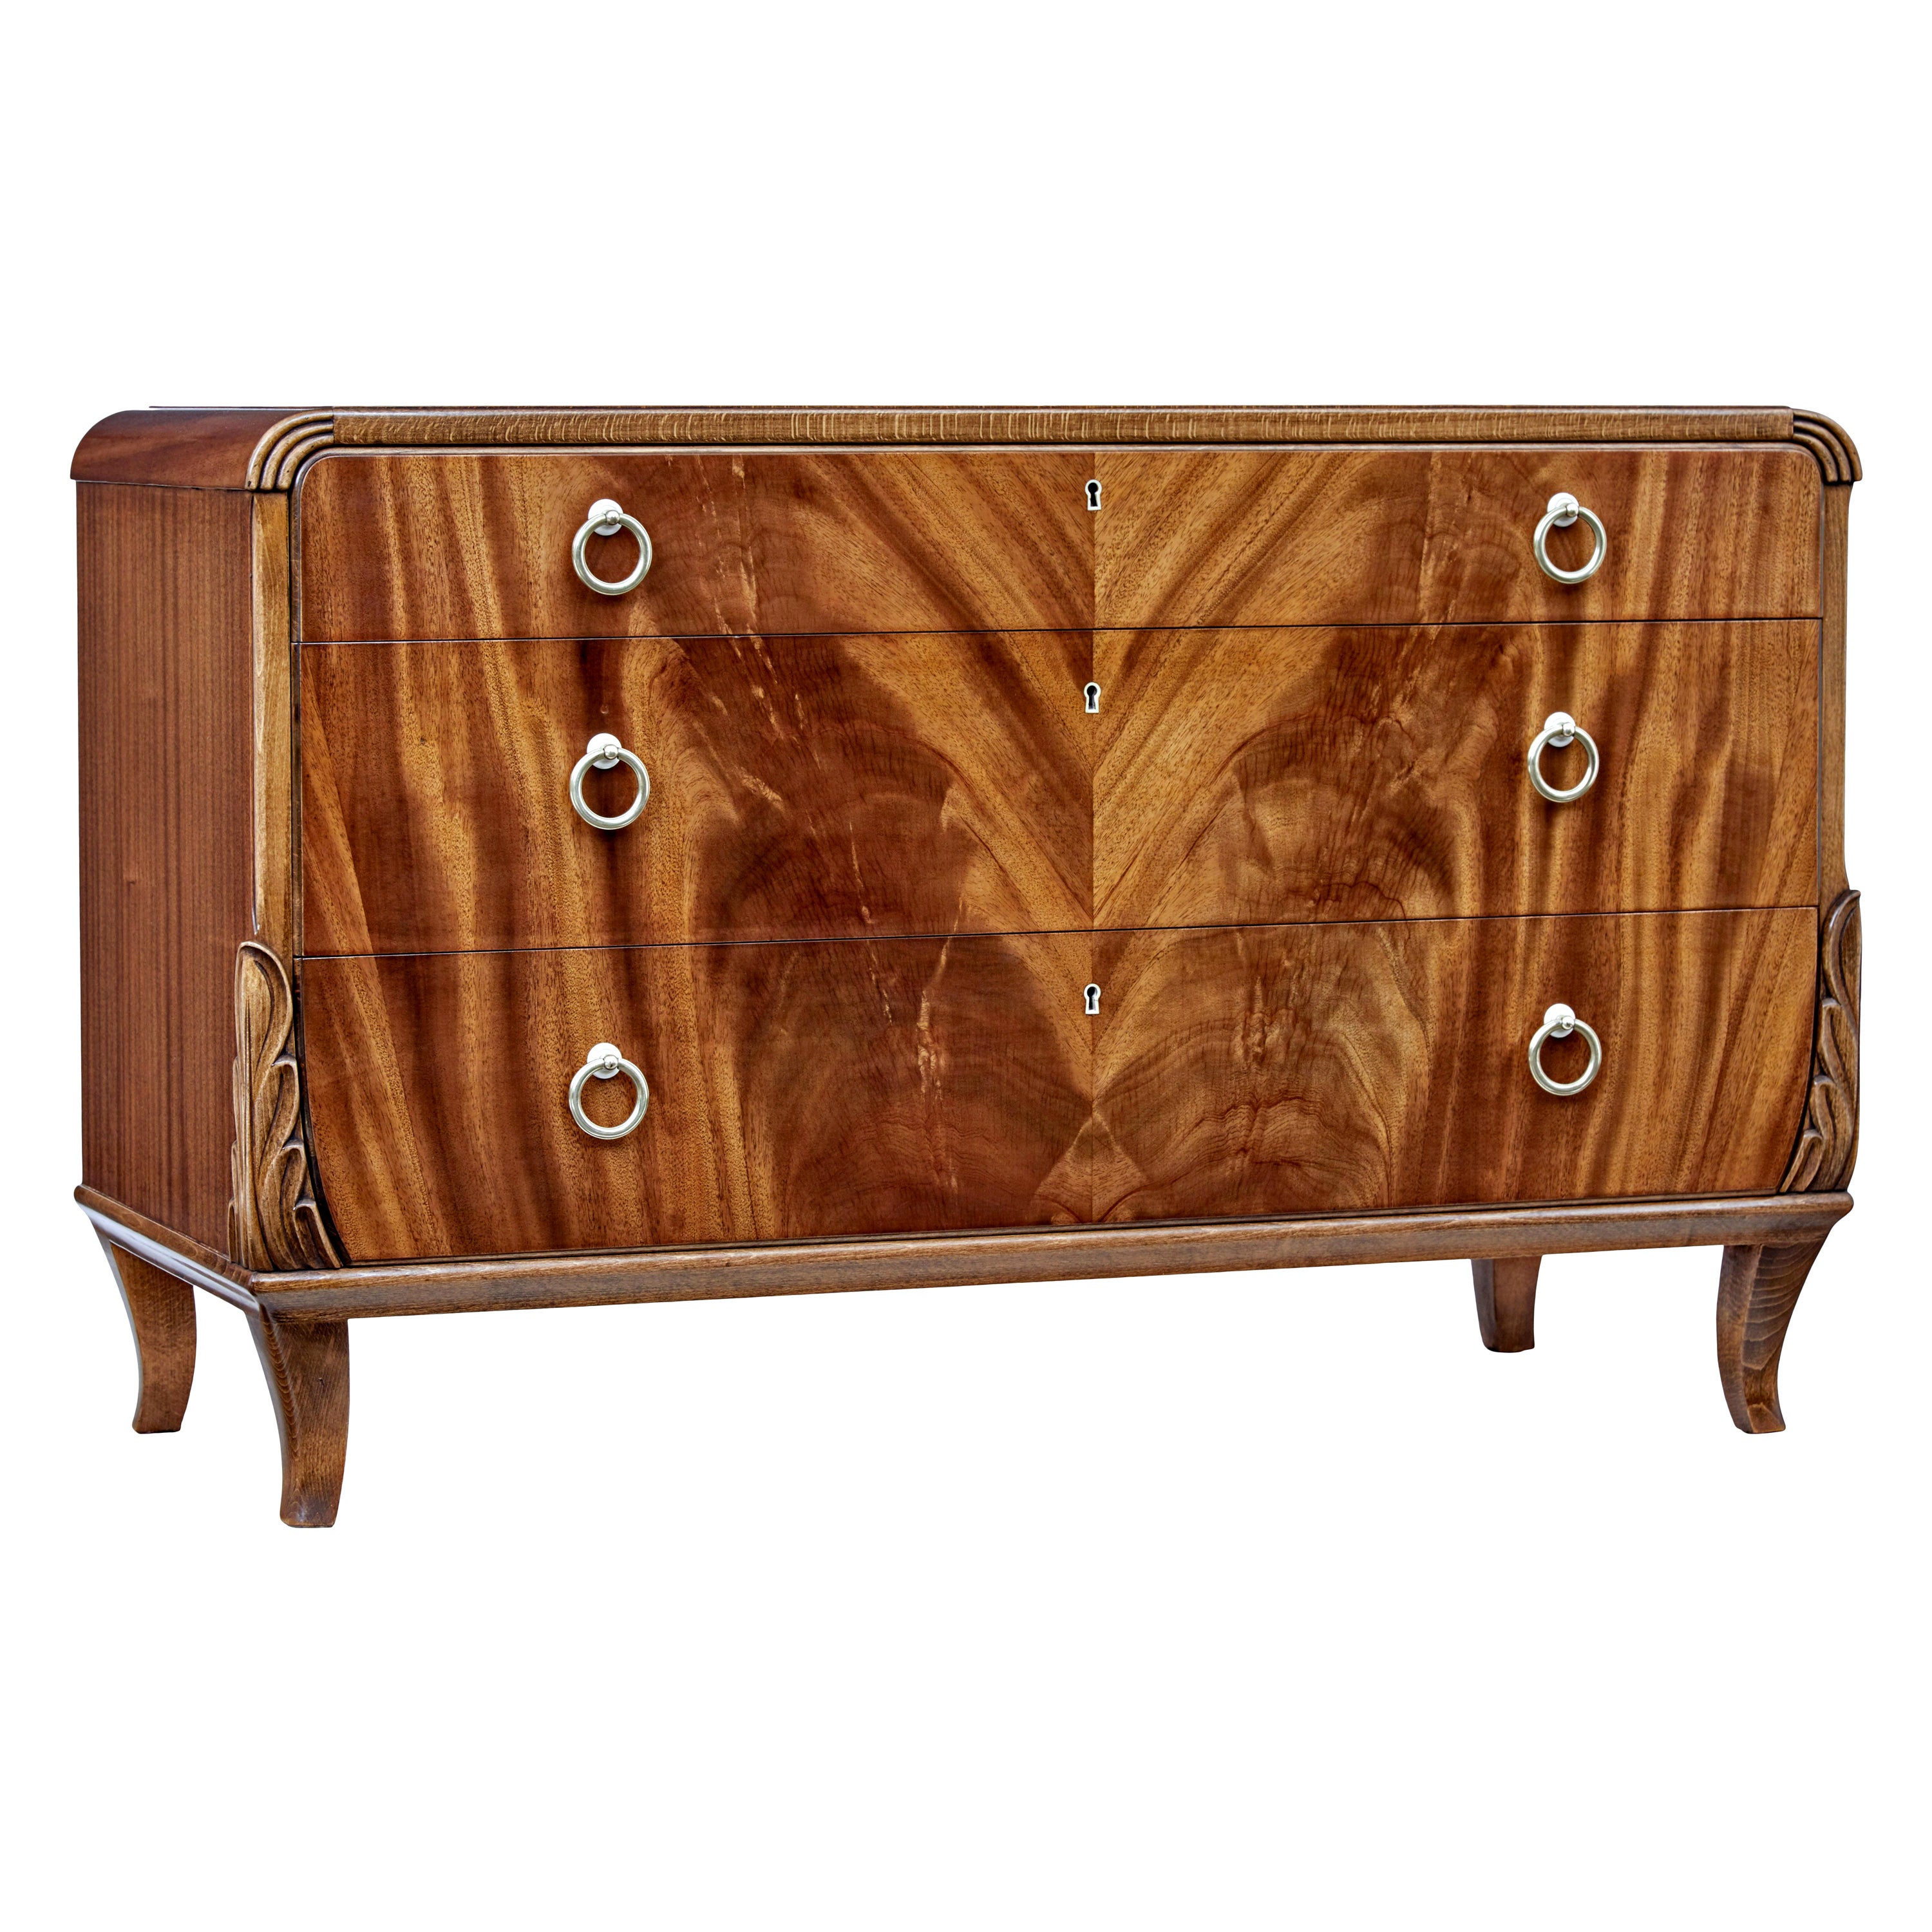 Mid 20th century mahogany chest of drawers by Bodafors